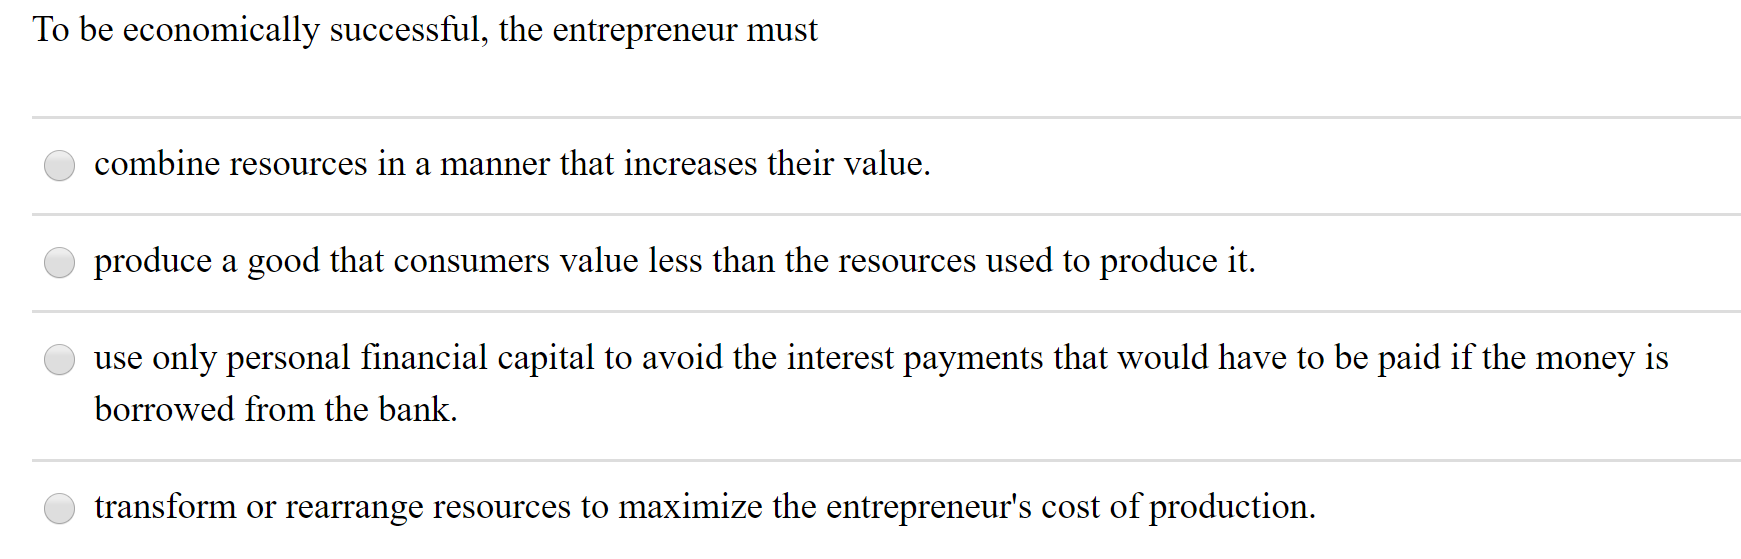 To be economically successful, the entrepreneur must
combine resources in a manner that increases their value.
produce a good that consumers value less than the resources used to produce it.
use only personal financial capital to avoid the interest payments that would have to be paid if the money is
borrowed from the bank.
transform or rearrange resources to maximize the entrepreneur's cost of production.
